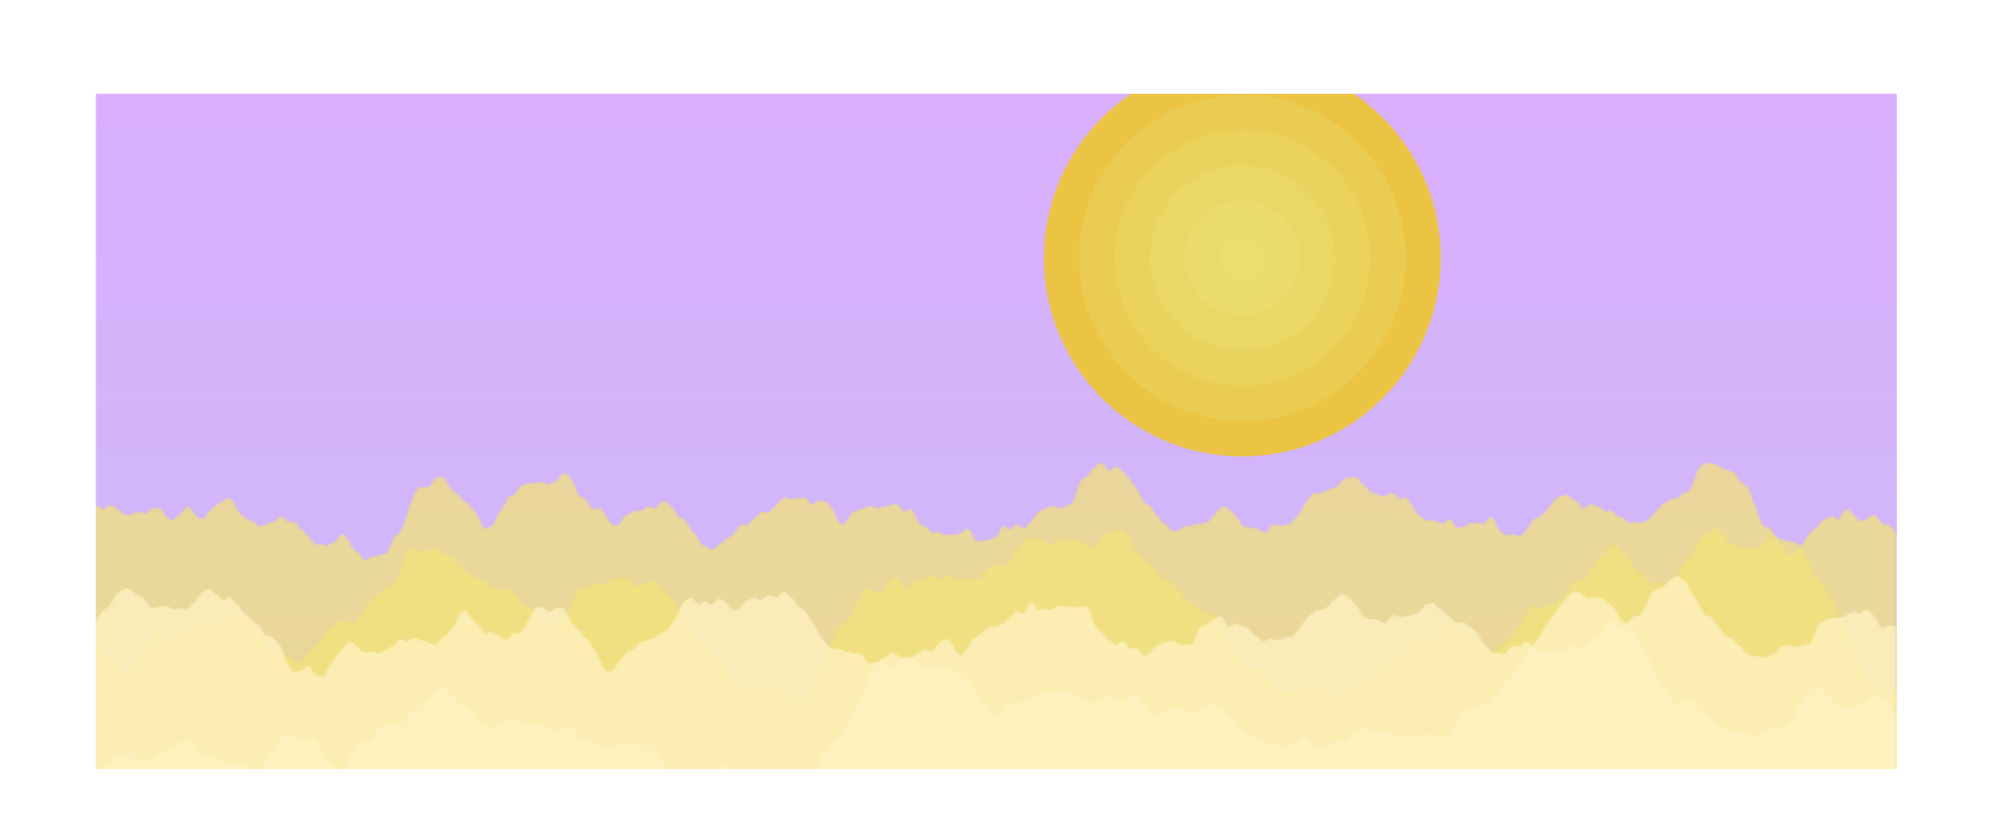 A landscape with a purple sky, bright yellow sun and muted yellow earth.